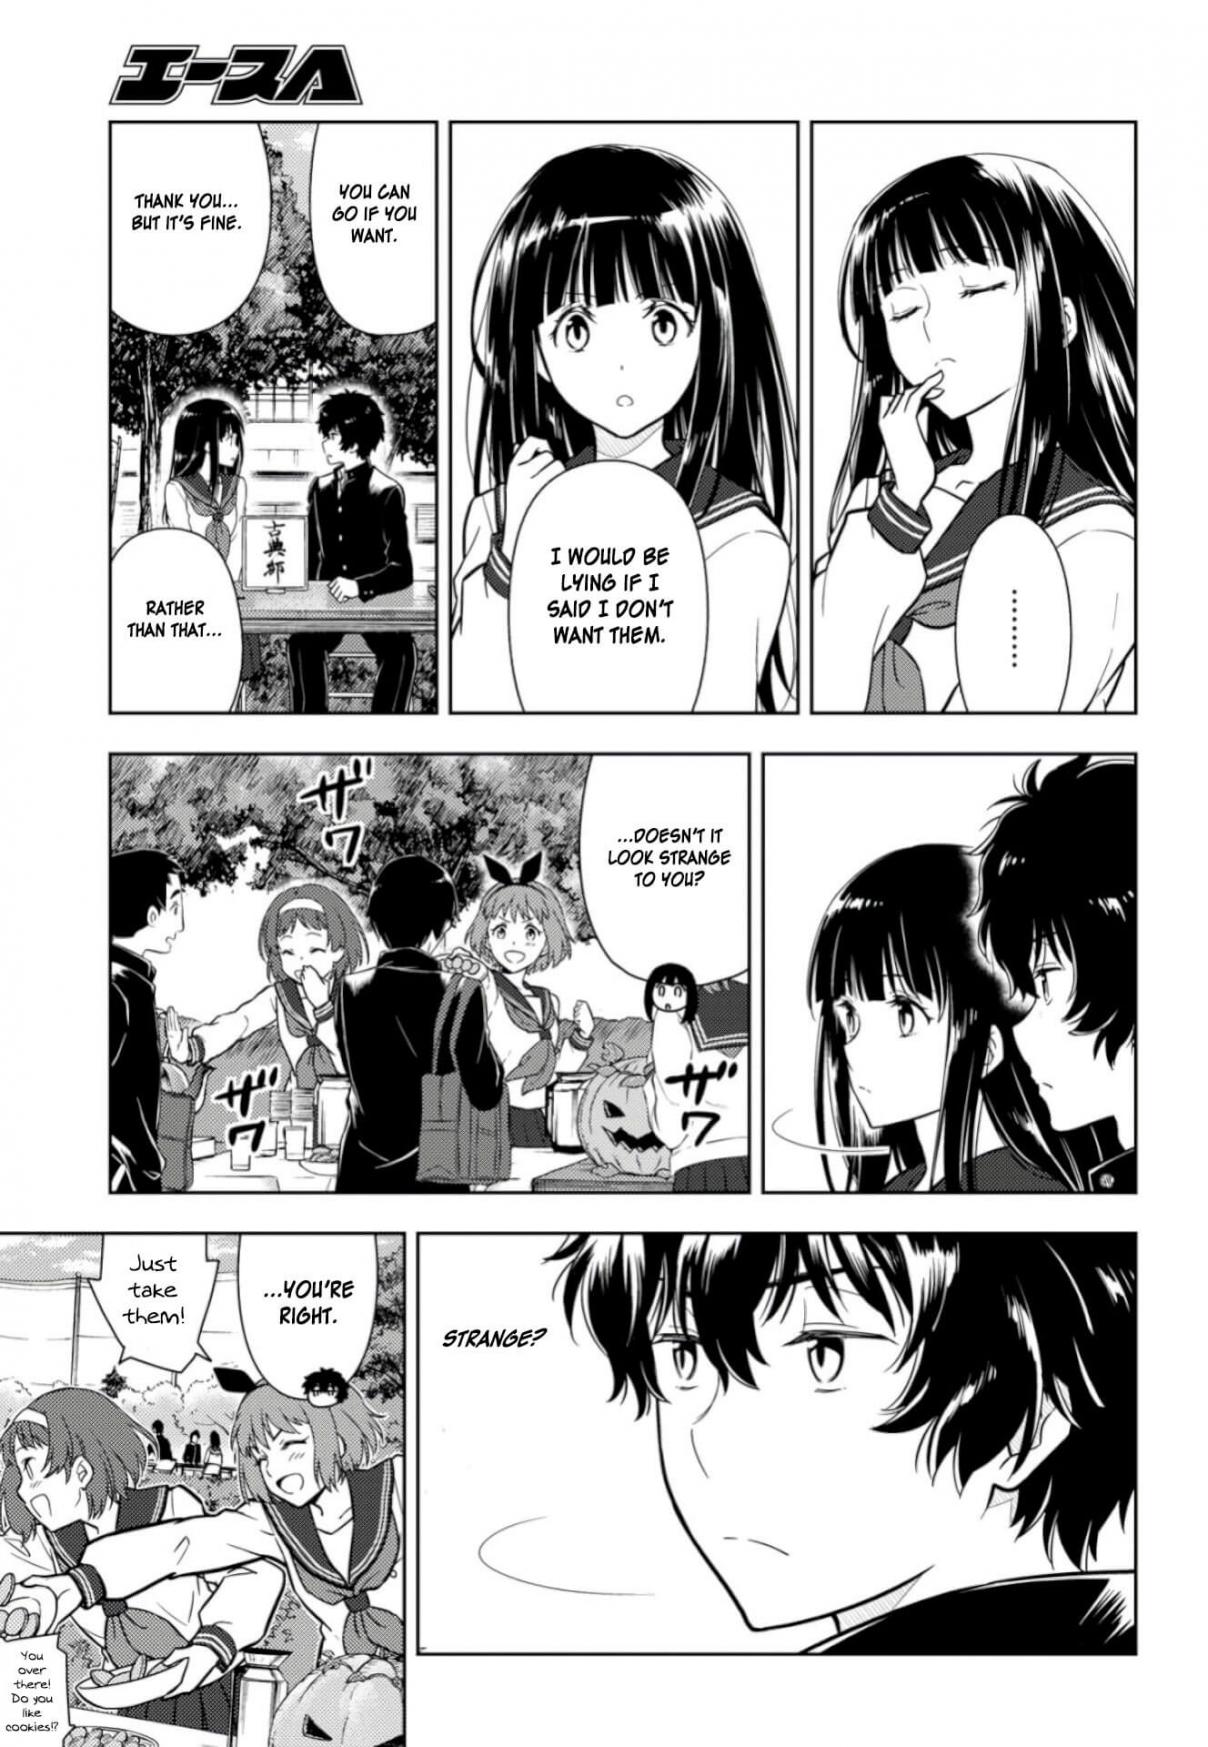 Hyouka Ch. 77 Club Applications Right Over Here! ➁